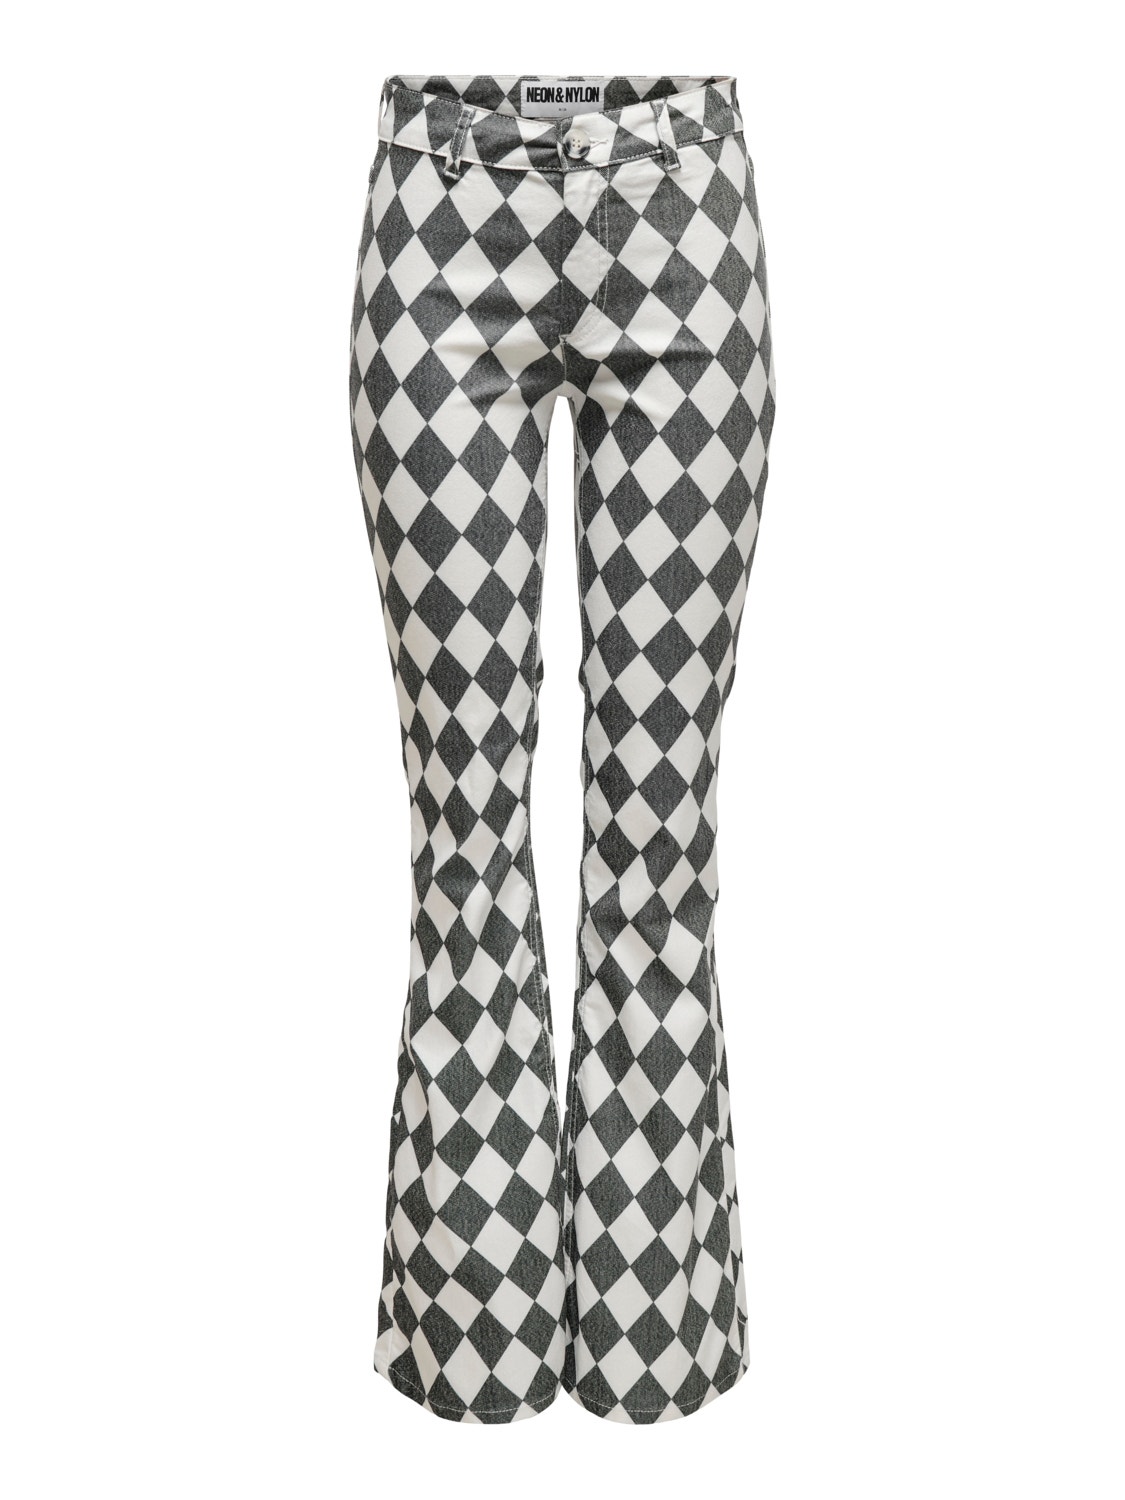 ONLY Patterned flared Trousers -Cloud Dancer - 15263926